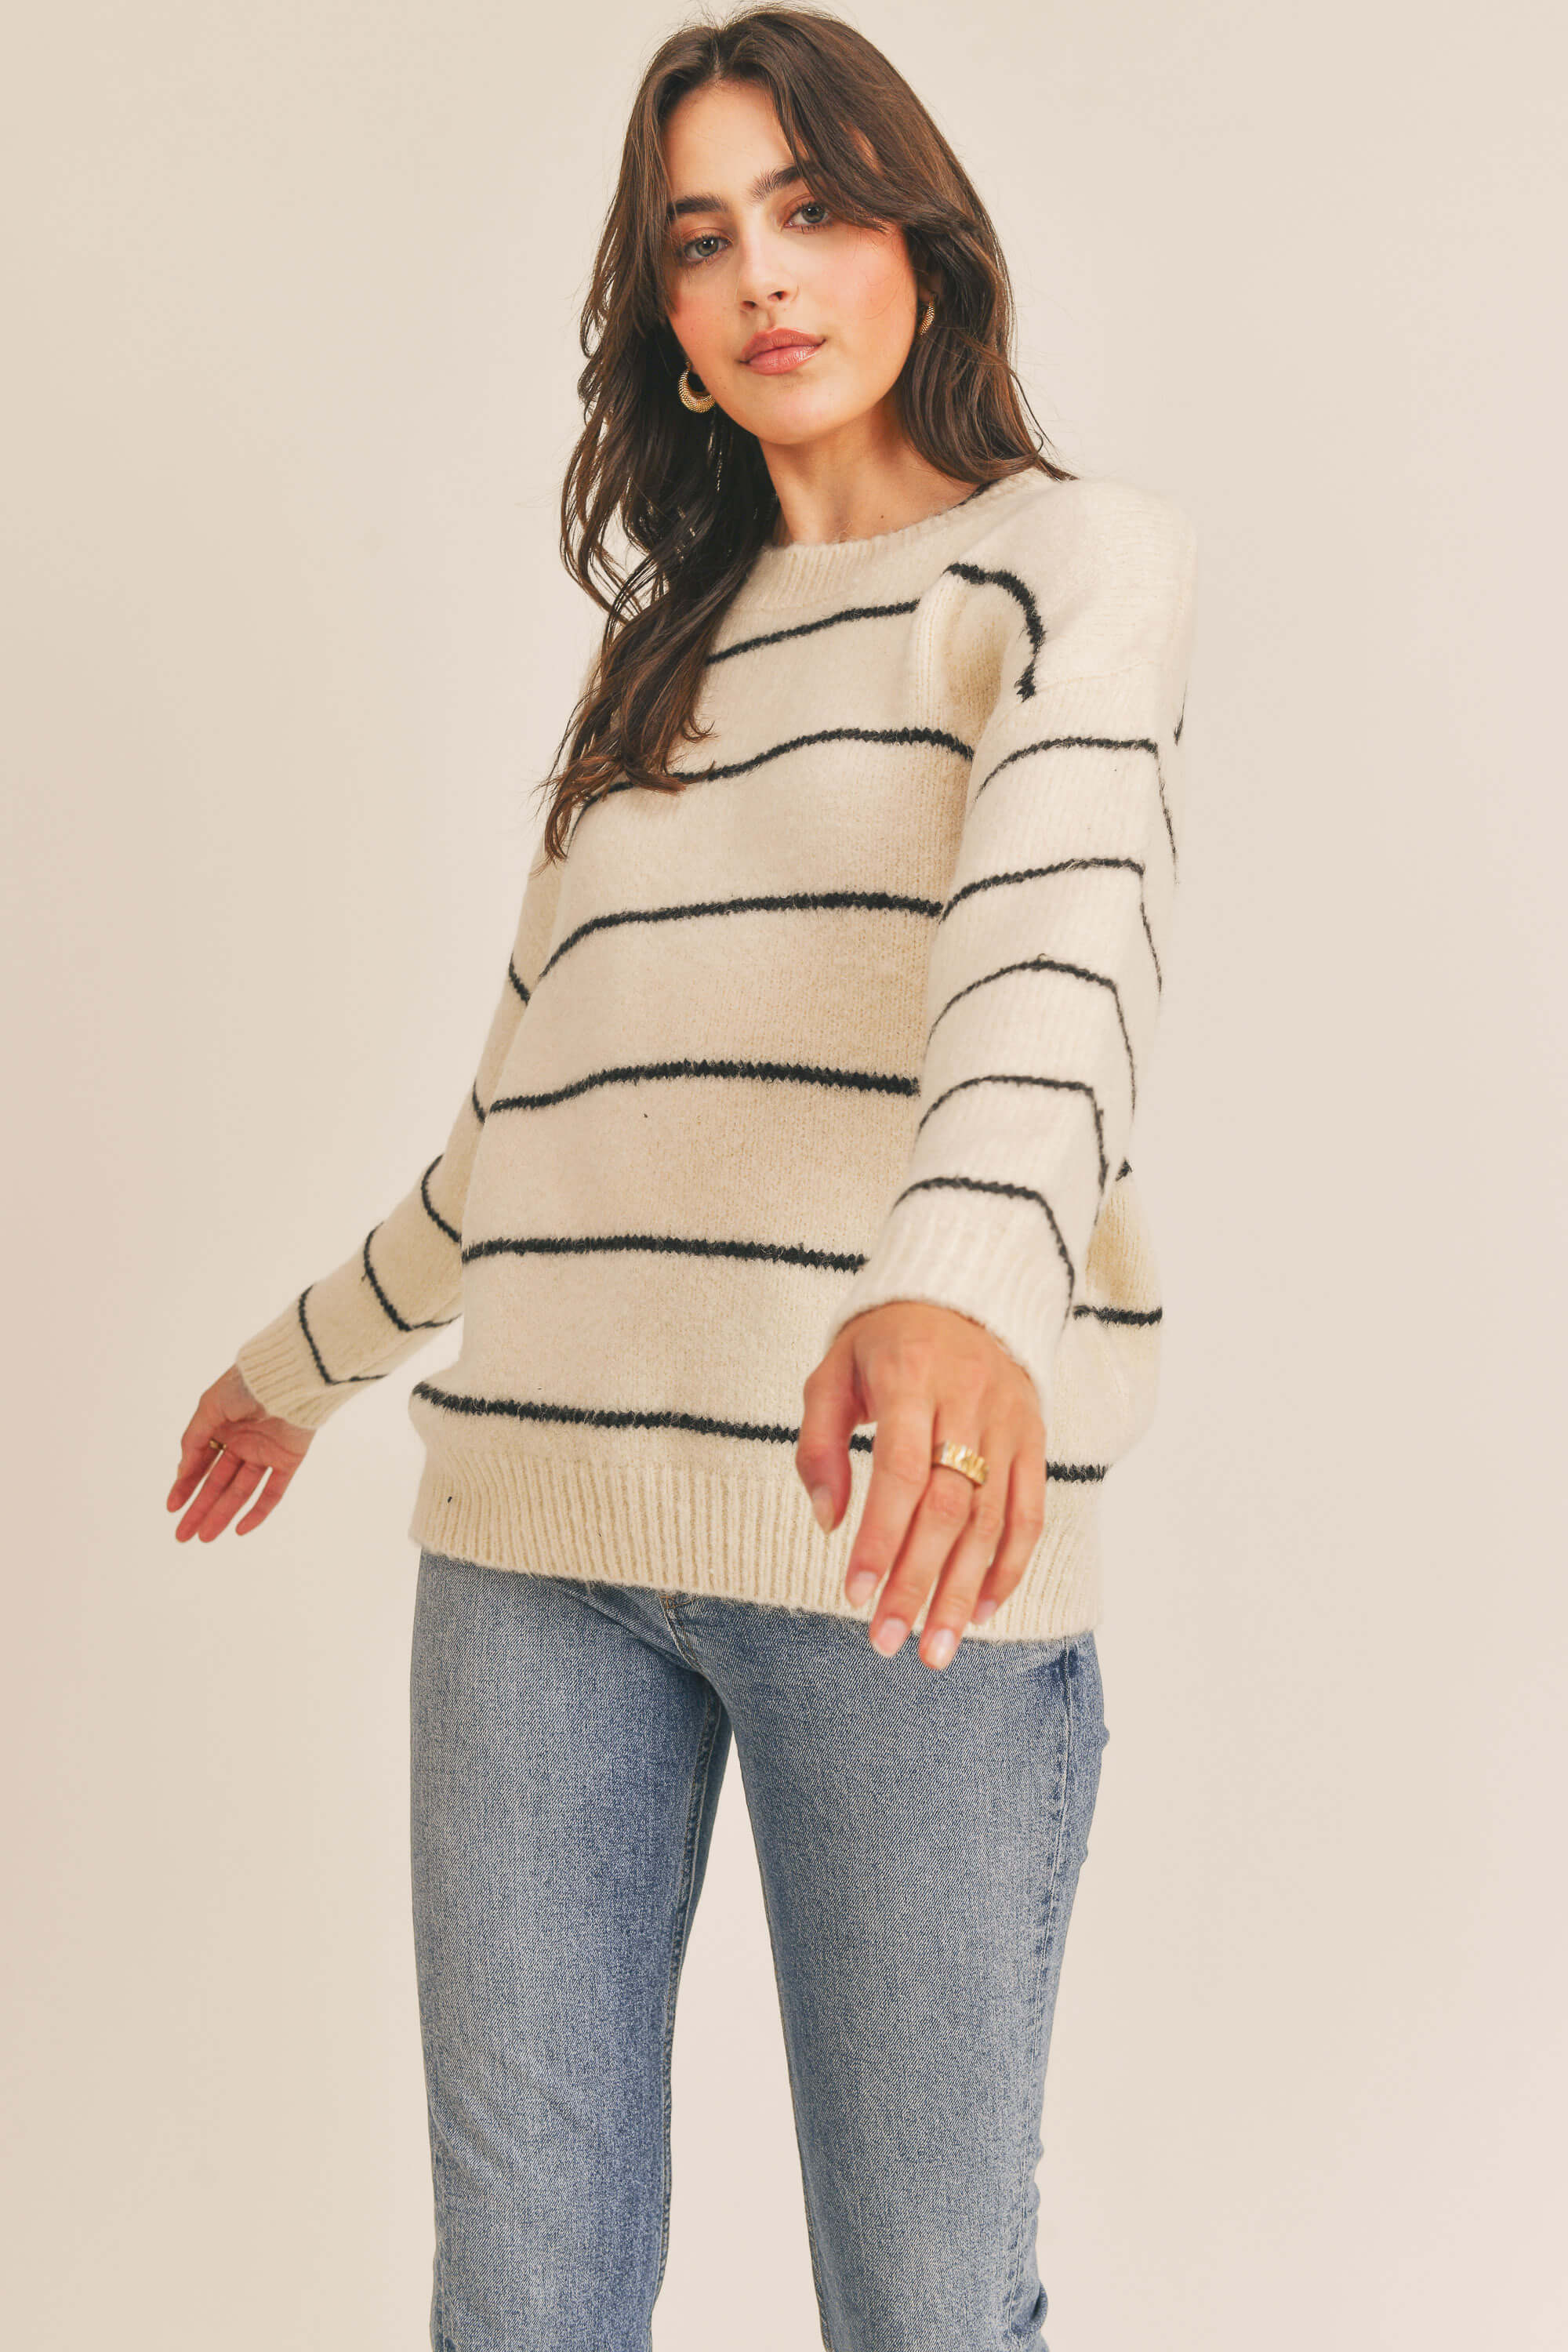 Lush Ivory Sweater with Black Stripes